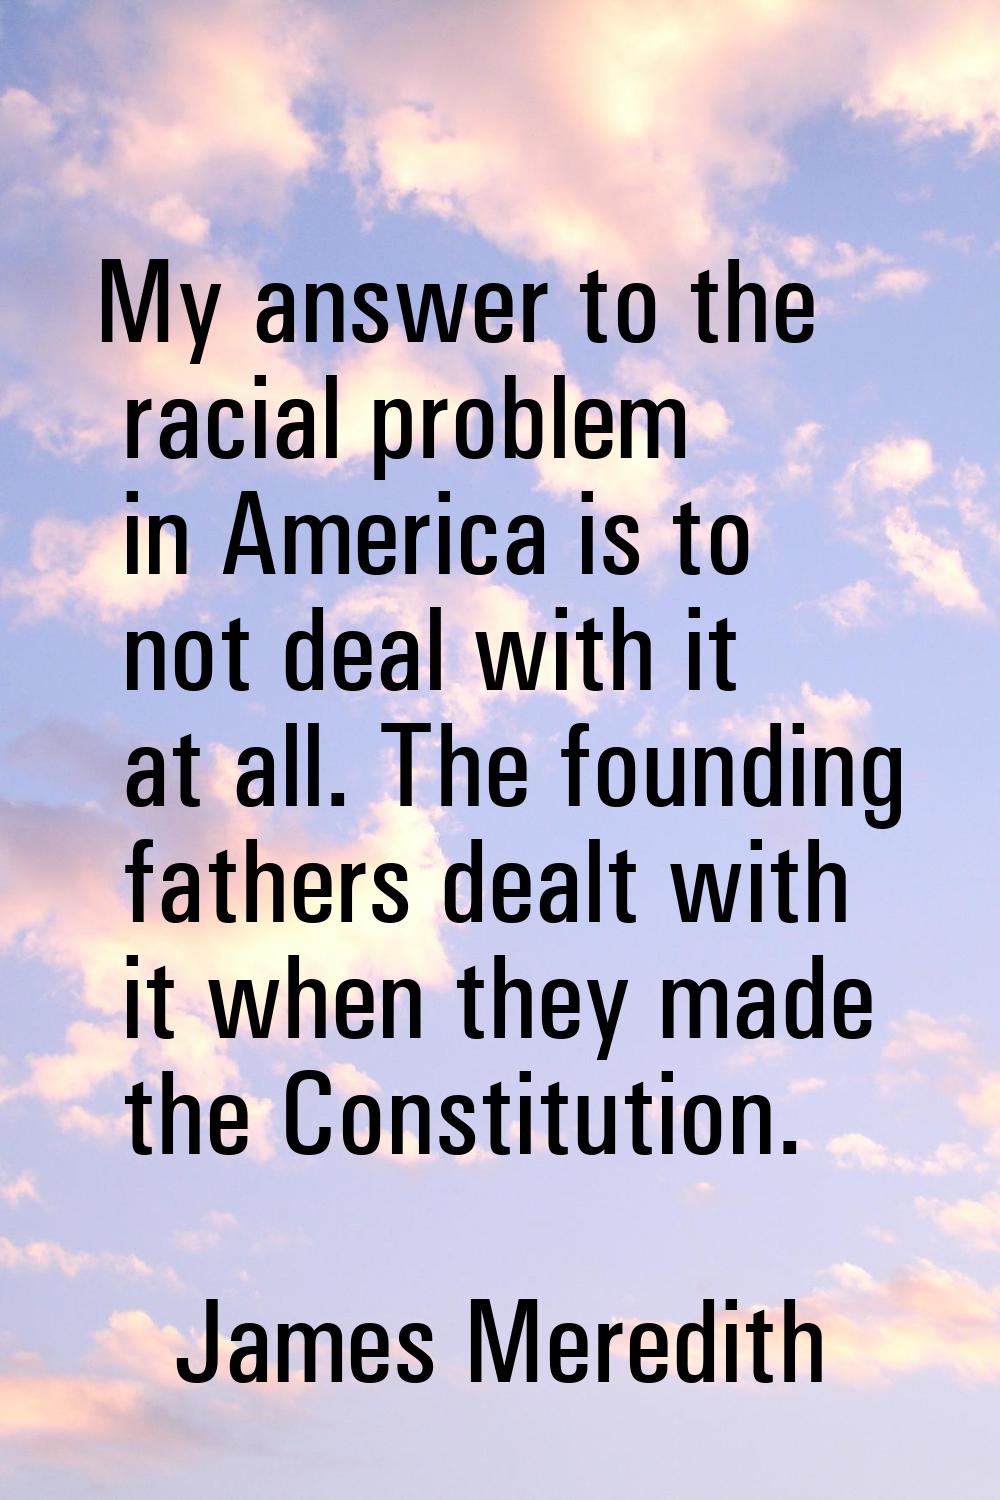 My answer to the racial problem in America is to not deal with it at all. The founding fathers deal